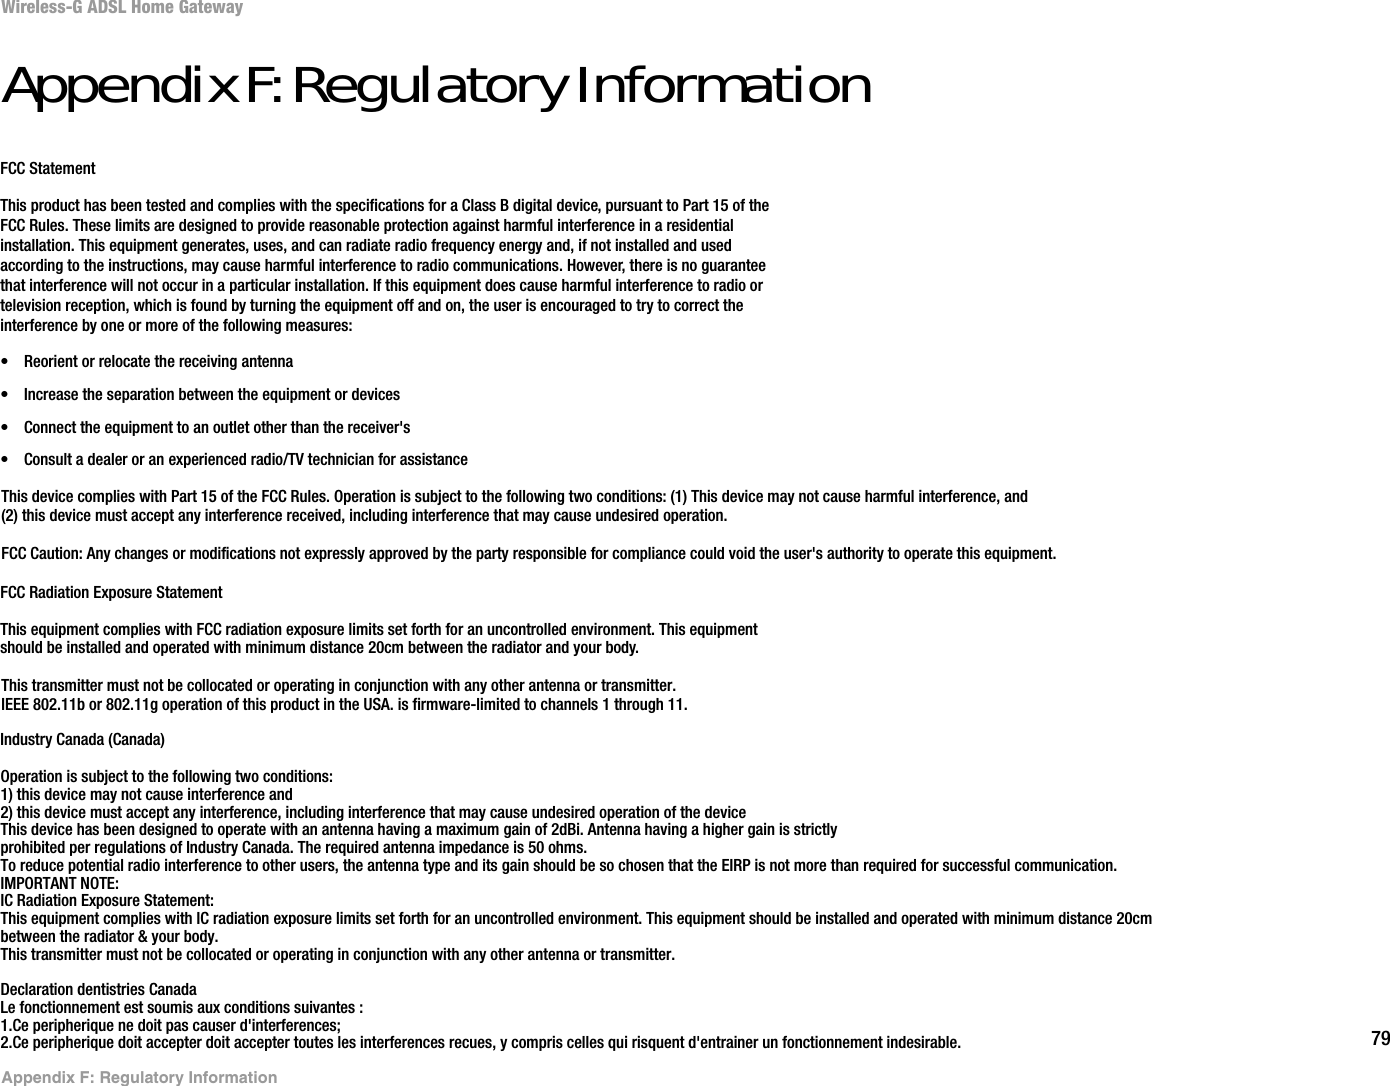 79Appendix F: Regulatory InformationWireless-G ADSL Home GatewayAppendixF:RegulatoryInformationFCC StatementThis product has been tested and complies with the specifications for a Class B digital device, pursuant to Part 15 of theFCC Rules. These limits are designed to provide reasonable protection against harmful interference in a residentialinstallation. This equipment generates, uses, and can radiate radio frequency energy and, if not installed and usedaccording to the instructions, may cause harmful interference to radio communications. However, there is no guaranteethat interference will not occur in a particular installation. If this equipment does cause harmful interference to radio ortelevision reception, which is found by turning the equipment off and on, the user is encouraged to try to correct theinterference by one or more of the following measures:• Reorient or relocate the receiving antenna• Increase the separation between the equipment or devices• Connect the equipment to an outlet other than the receiver&apos;s• Consult a dealer or an experienced radio/TV technician for assistanceFCC Radiation Exposure StatementThis equipment complies with FCC radiation exposure limits set forth for an uncontrolled environment. This equipmentshould be installed and operated with minimum distance 20cm between the radiator and your body.Industry Canada (Canada)This device complies with Part 15 of the FCC Rules. Operation is subject to the following two conditions: (1) This device may not cause harmful interference, and(2) this device must accept any interference received, including interference that may cause undesired operation.FCC Caution: Any changes or modifications not expressly approved by the party responsible for compliance could void the user&apos;s authority to operate this equipment.This transmitter must not be collocated or operating in conjunction with any other antenna or transmitter.IEEE 802.11b or 802.11g operation of this product in the USA. is firmware-limited to channels 1 through 11.Operation is subject to the following two conditions:1) this device may not cause interference and2) this device must accept any interference, including interference that may cause undesired operation of the deviceThis device has been designed to operate with an antenna having a maximum gain of 2dBi. Antenna having a higher gain is strictlyprohibited per regulations of Industry Canada. The required antenna impedance is 50 ohms.To reduce potential radio interference to other users, the antenna type and its gain should be so chosen that the EIRP is not more than required for successful communication.IMPORTANT NOTE:IC Radiation Exposure Statement:This equipment complies with IC radiation exposure limits set forth for an uncontrolled environment. This equipment should be installed and operated with minimum distance 20cmbetween the radiator &amp; your body.This transmitter must not be collocated or operating in conjunction with any other antenna or transmitter.Declaration dentistries CanadaLe fonctionnement est soumis aux conditions suivantes :1.Ce peripherique ne doit pas causer d&apos;interferences;2.Ce peripherique doit accepter doit accepter toutes les interferences recues, y compris celles qui risquent d&apos;entrainer un fonctionnement indesirable.